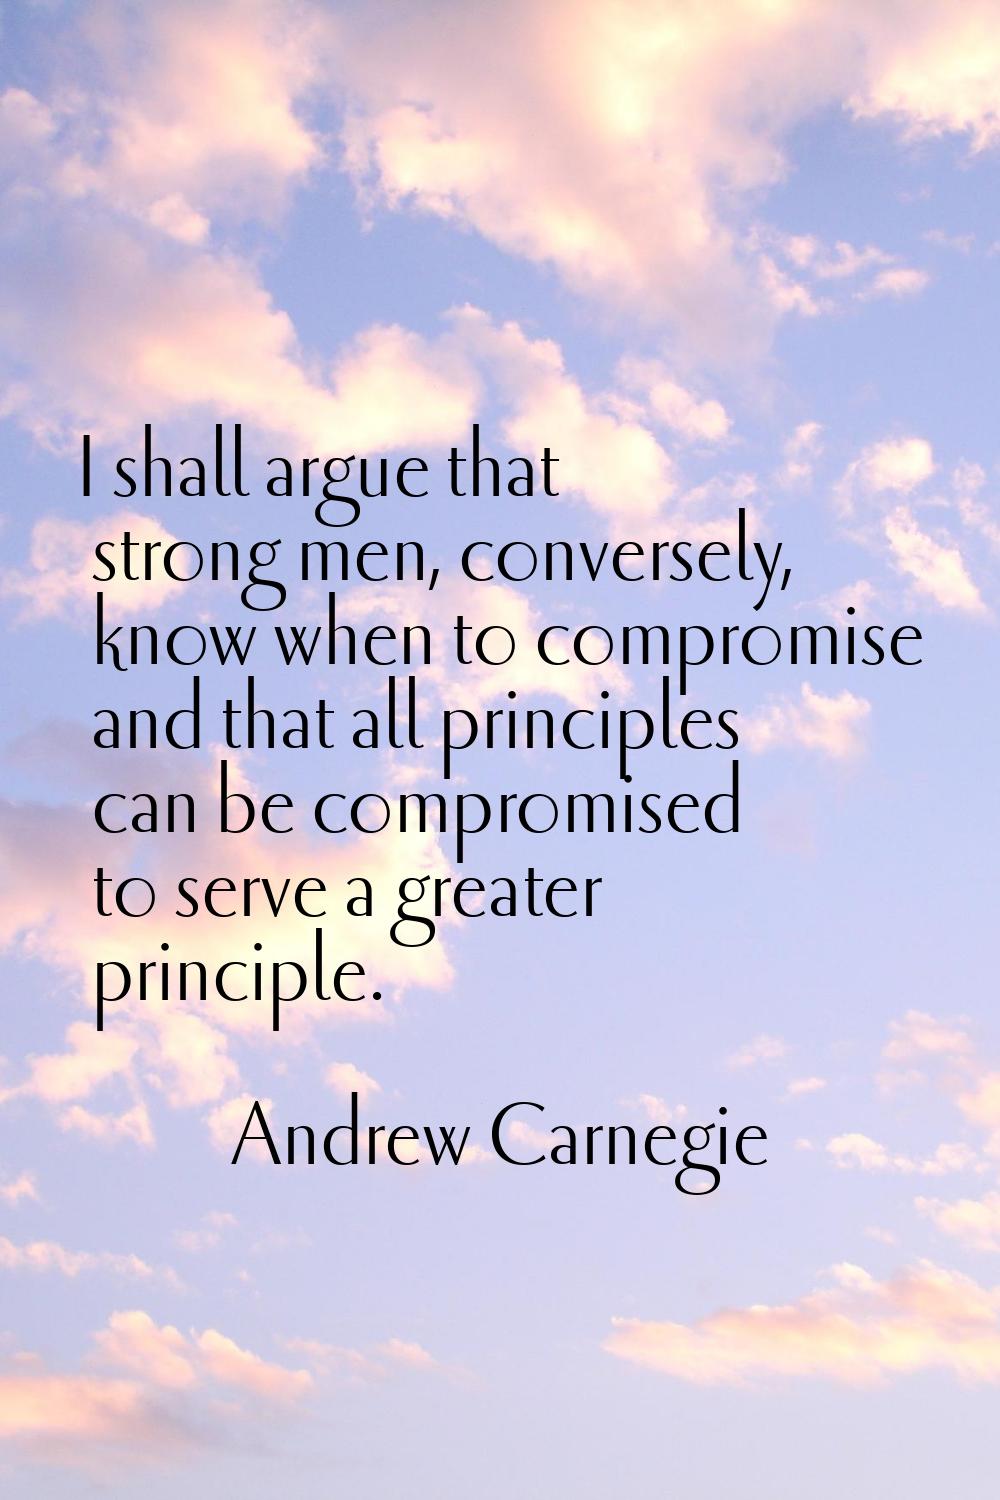 I shall argue that strong men, conversely, know when to compromise and that all principles can be c